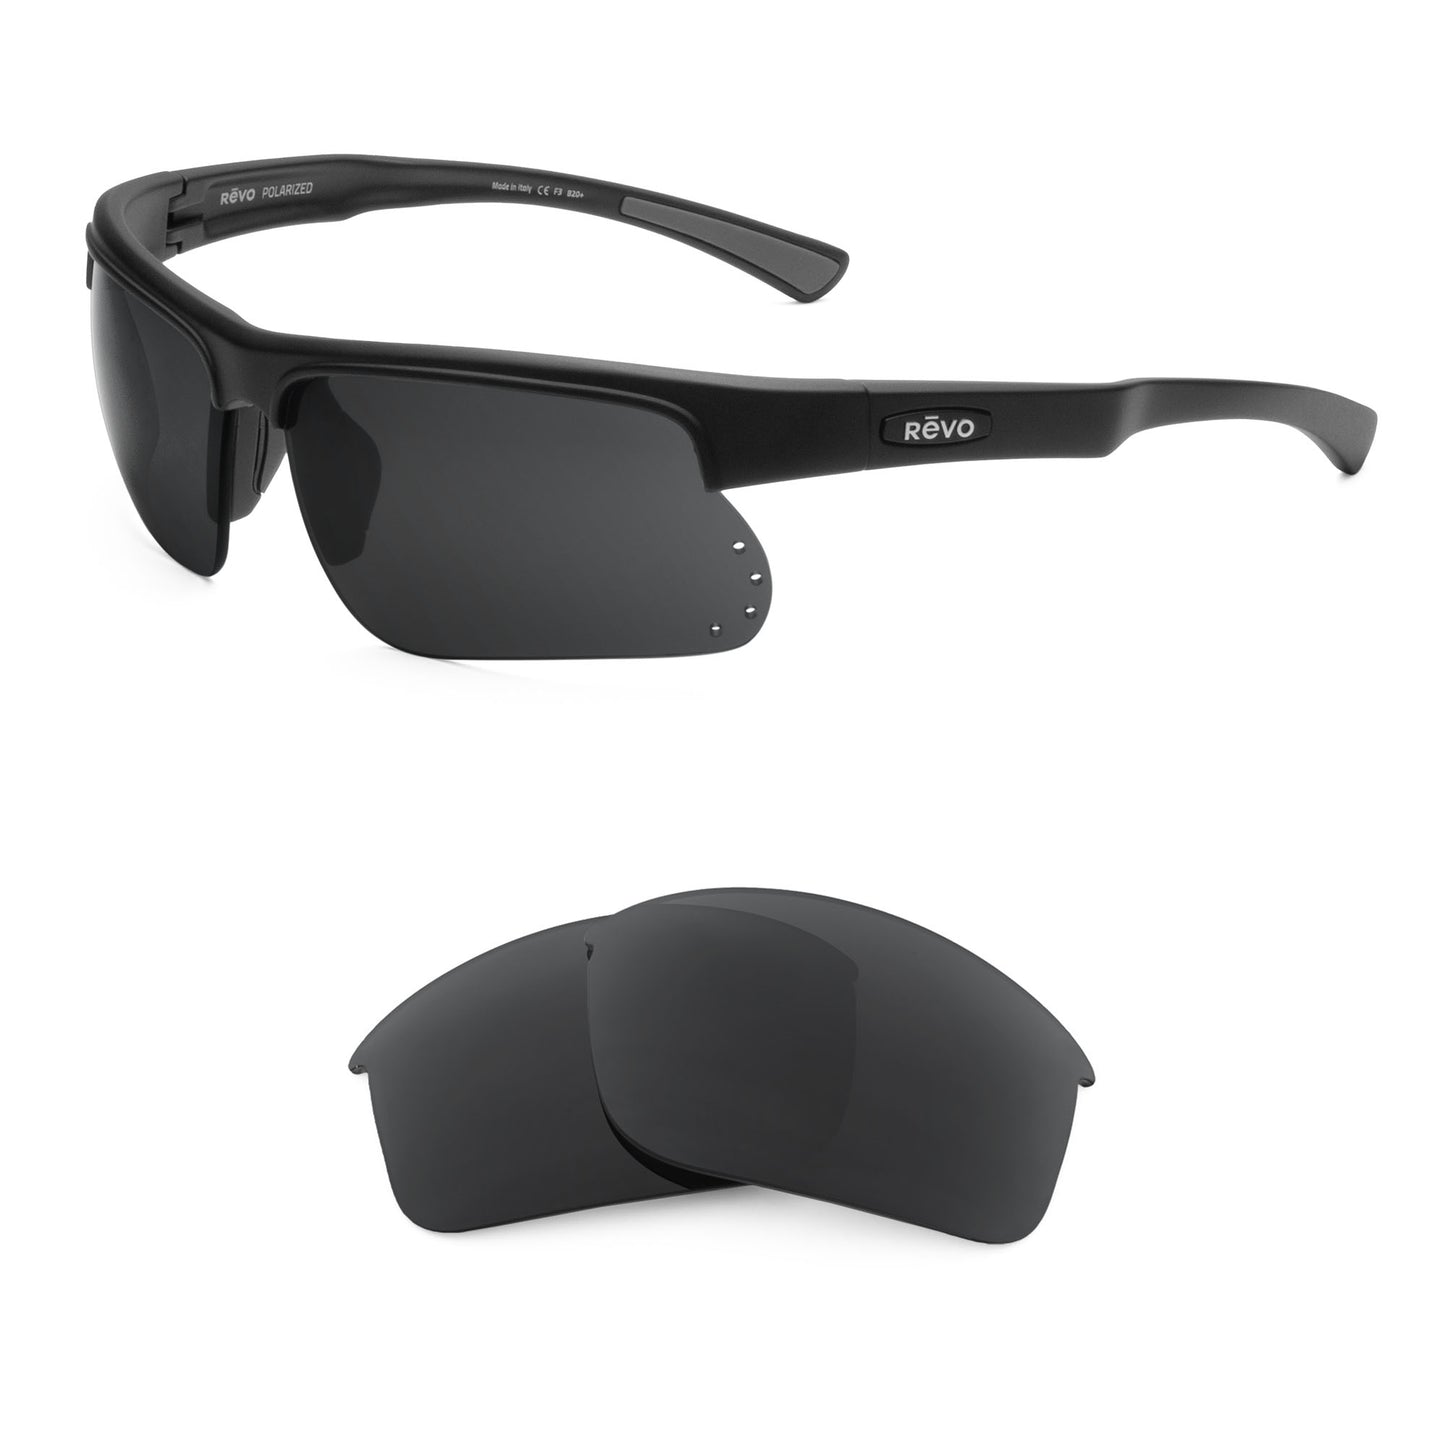 Revo Cusp S sunglasses with replacement lenses